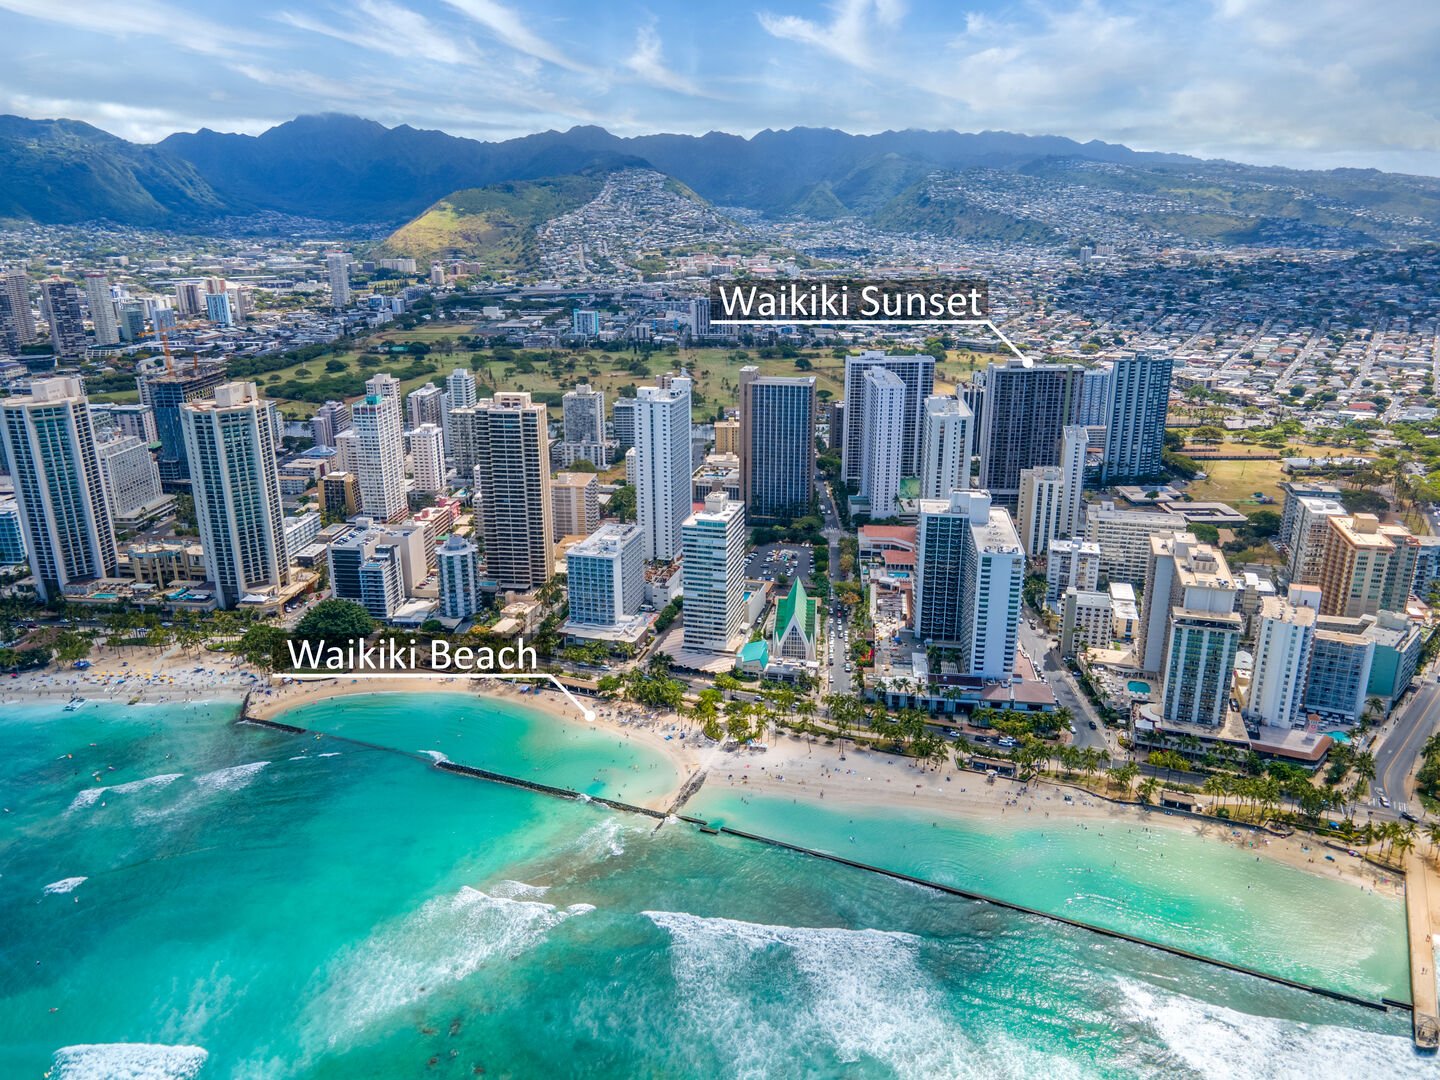 The Waikiki Sunset is within walking distance from the beach!